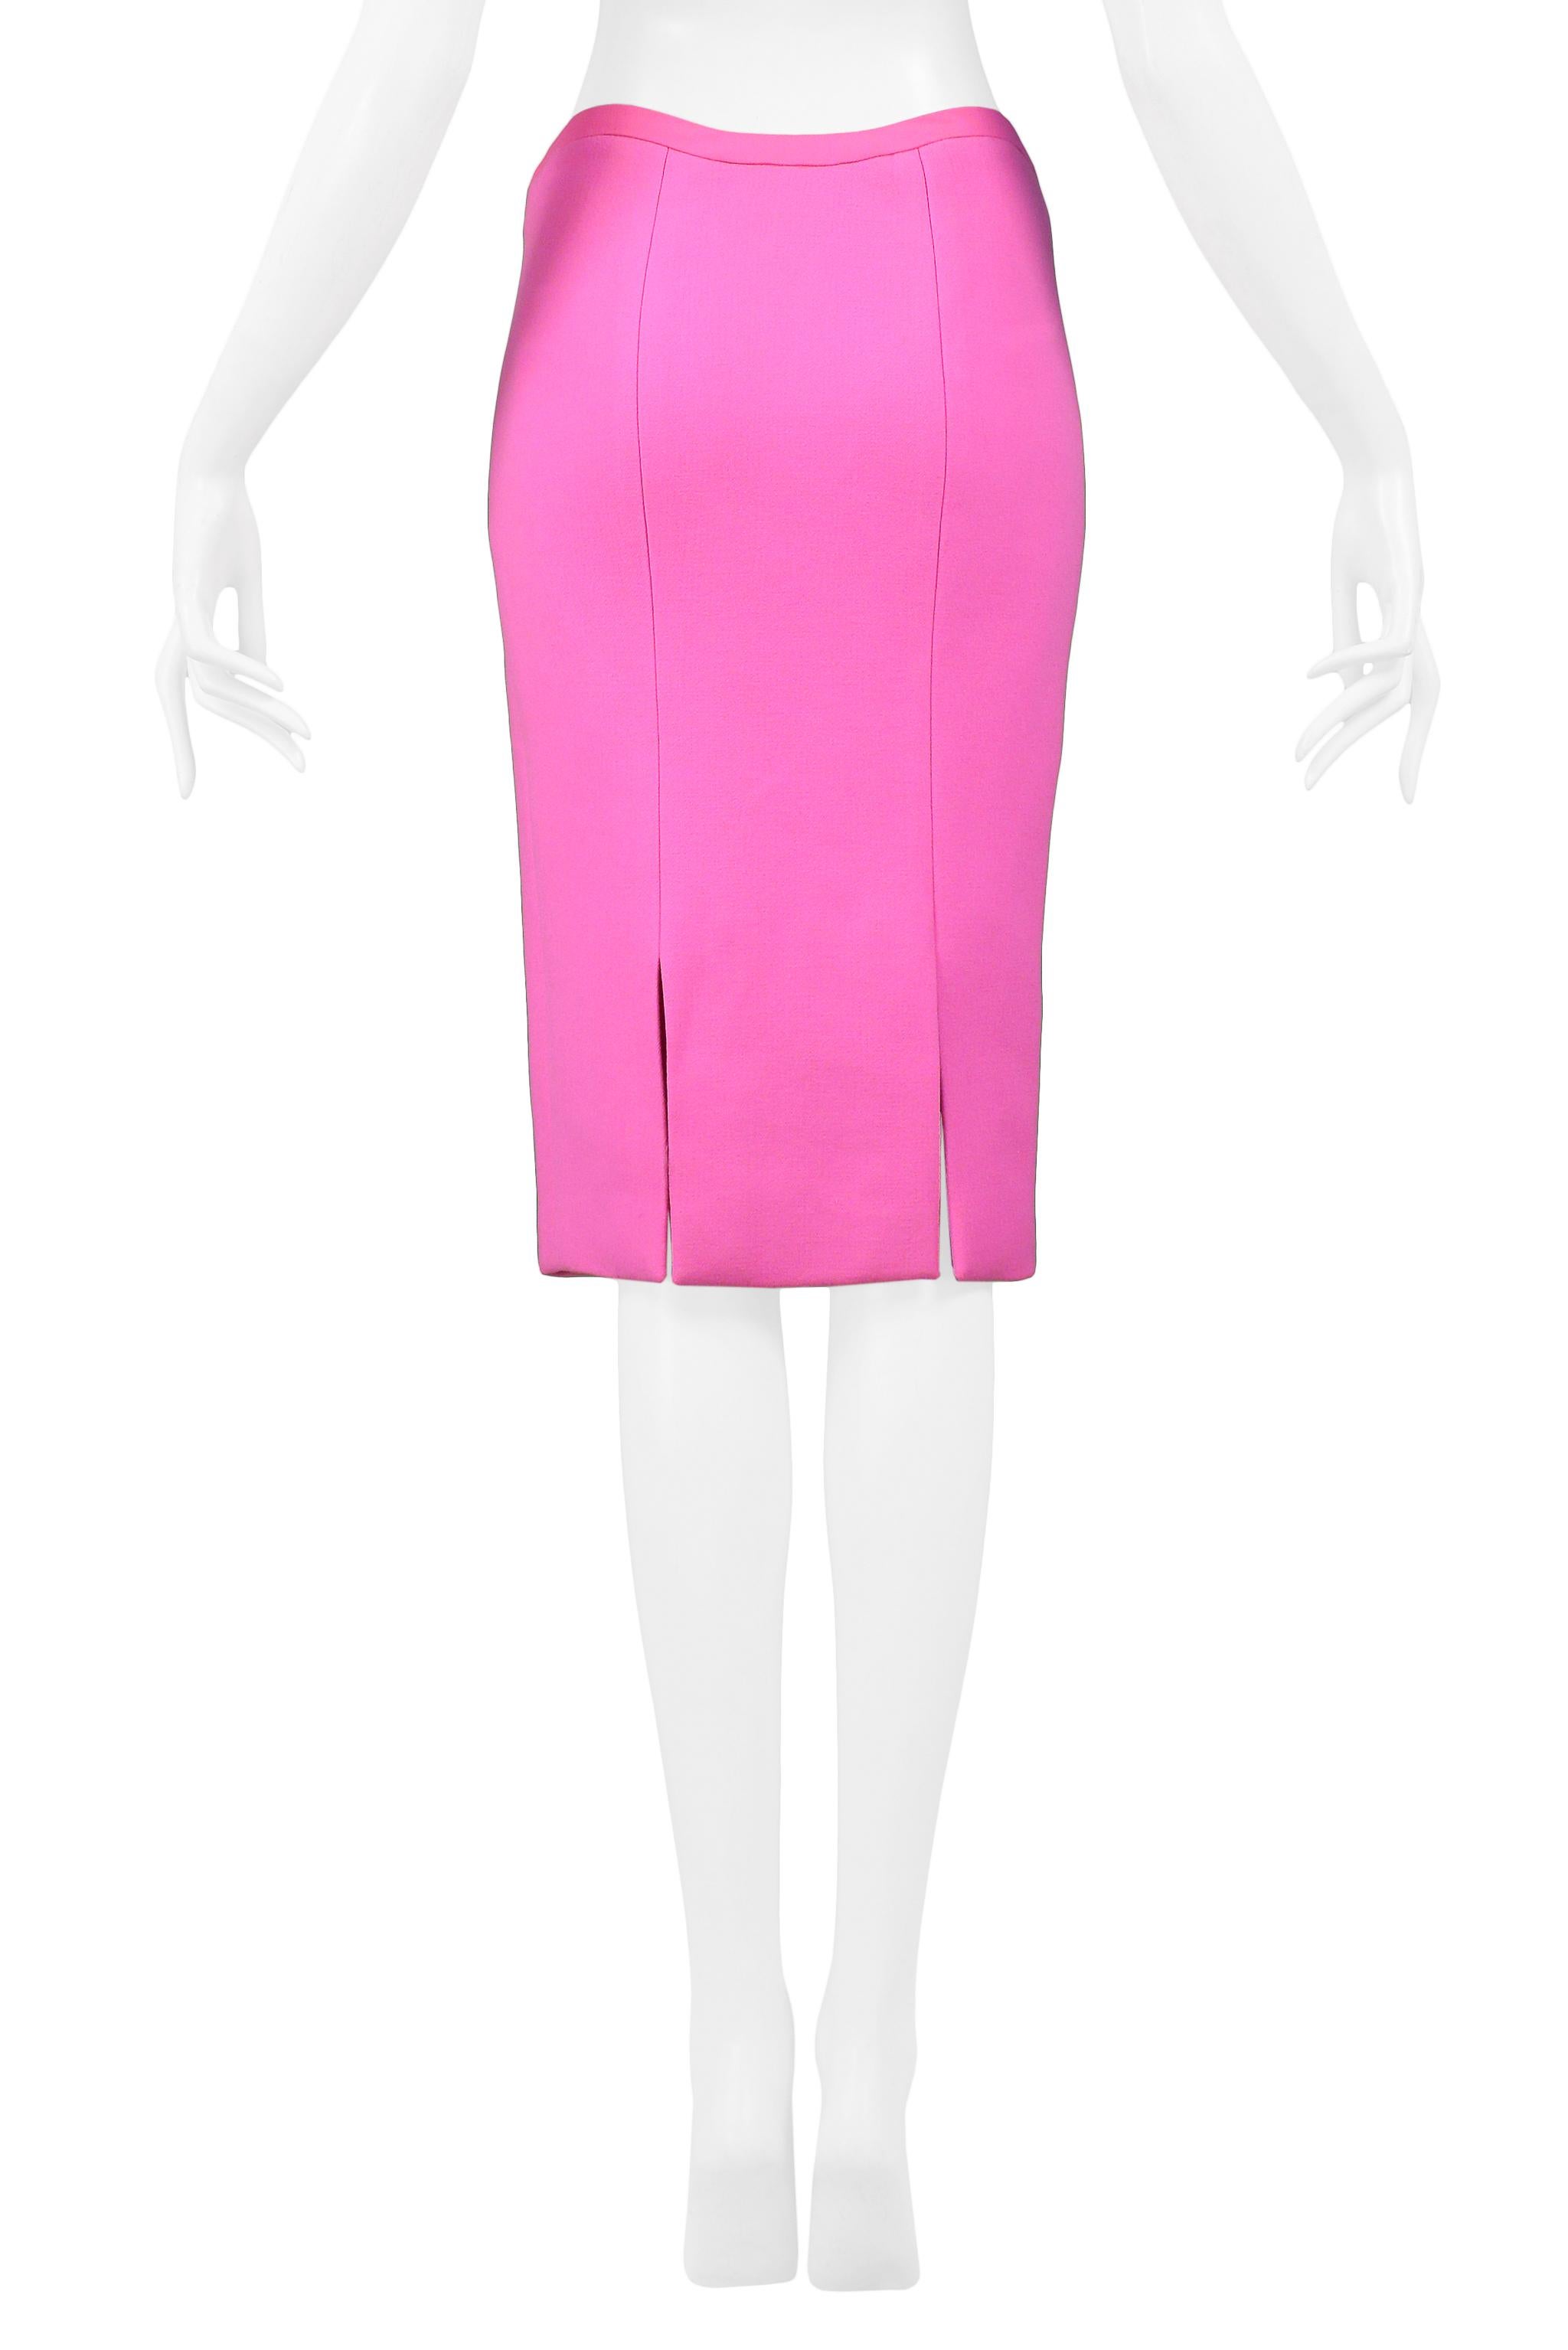 Vintage Versace Pink Pencil Skirt 2002 In Excellent Condition For Sale In Los Angeles, CA